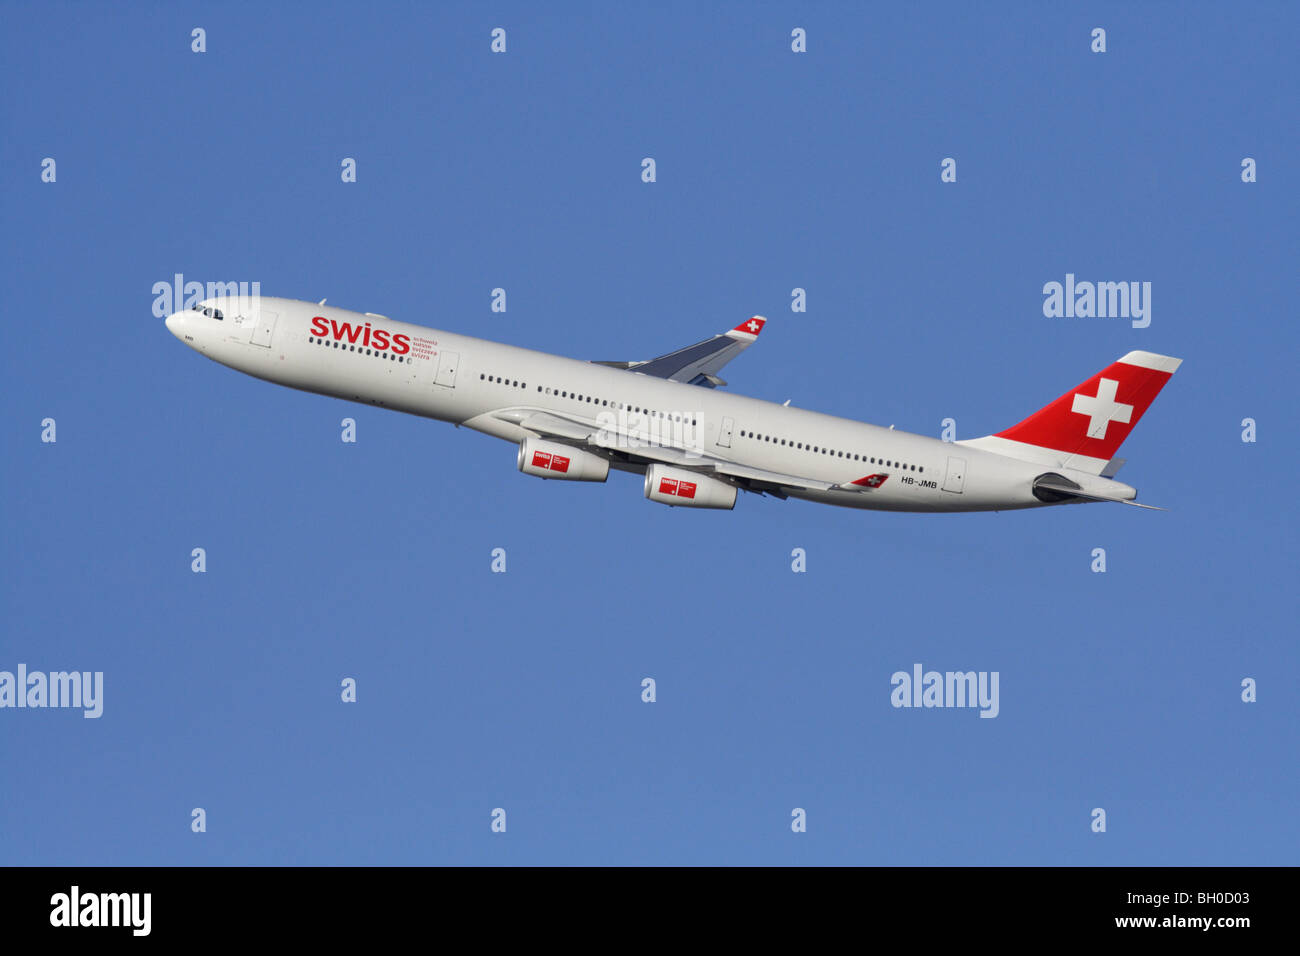 Air travel. Swiss International Air Lines Airbus A340-300 jet plane flying in the air against a clear blue sky Stock Photo